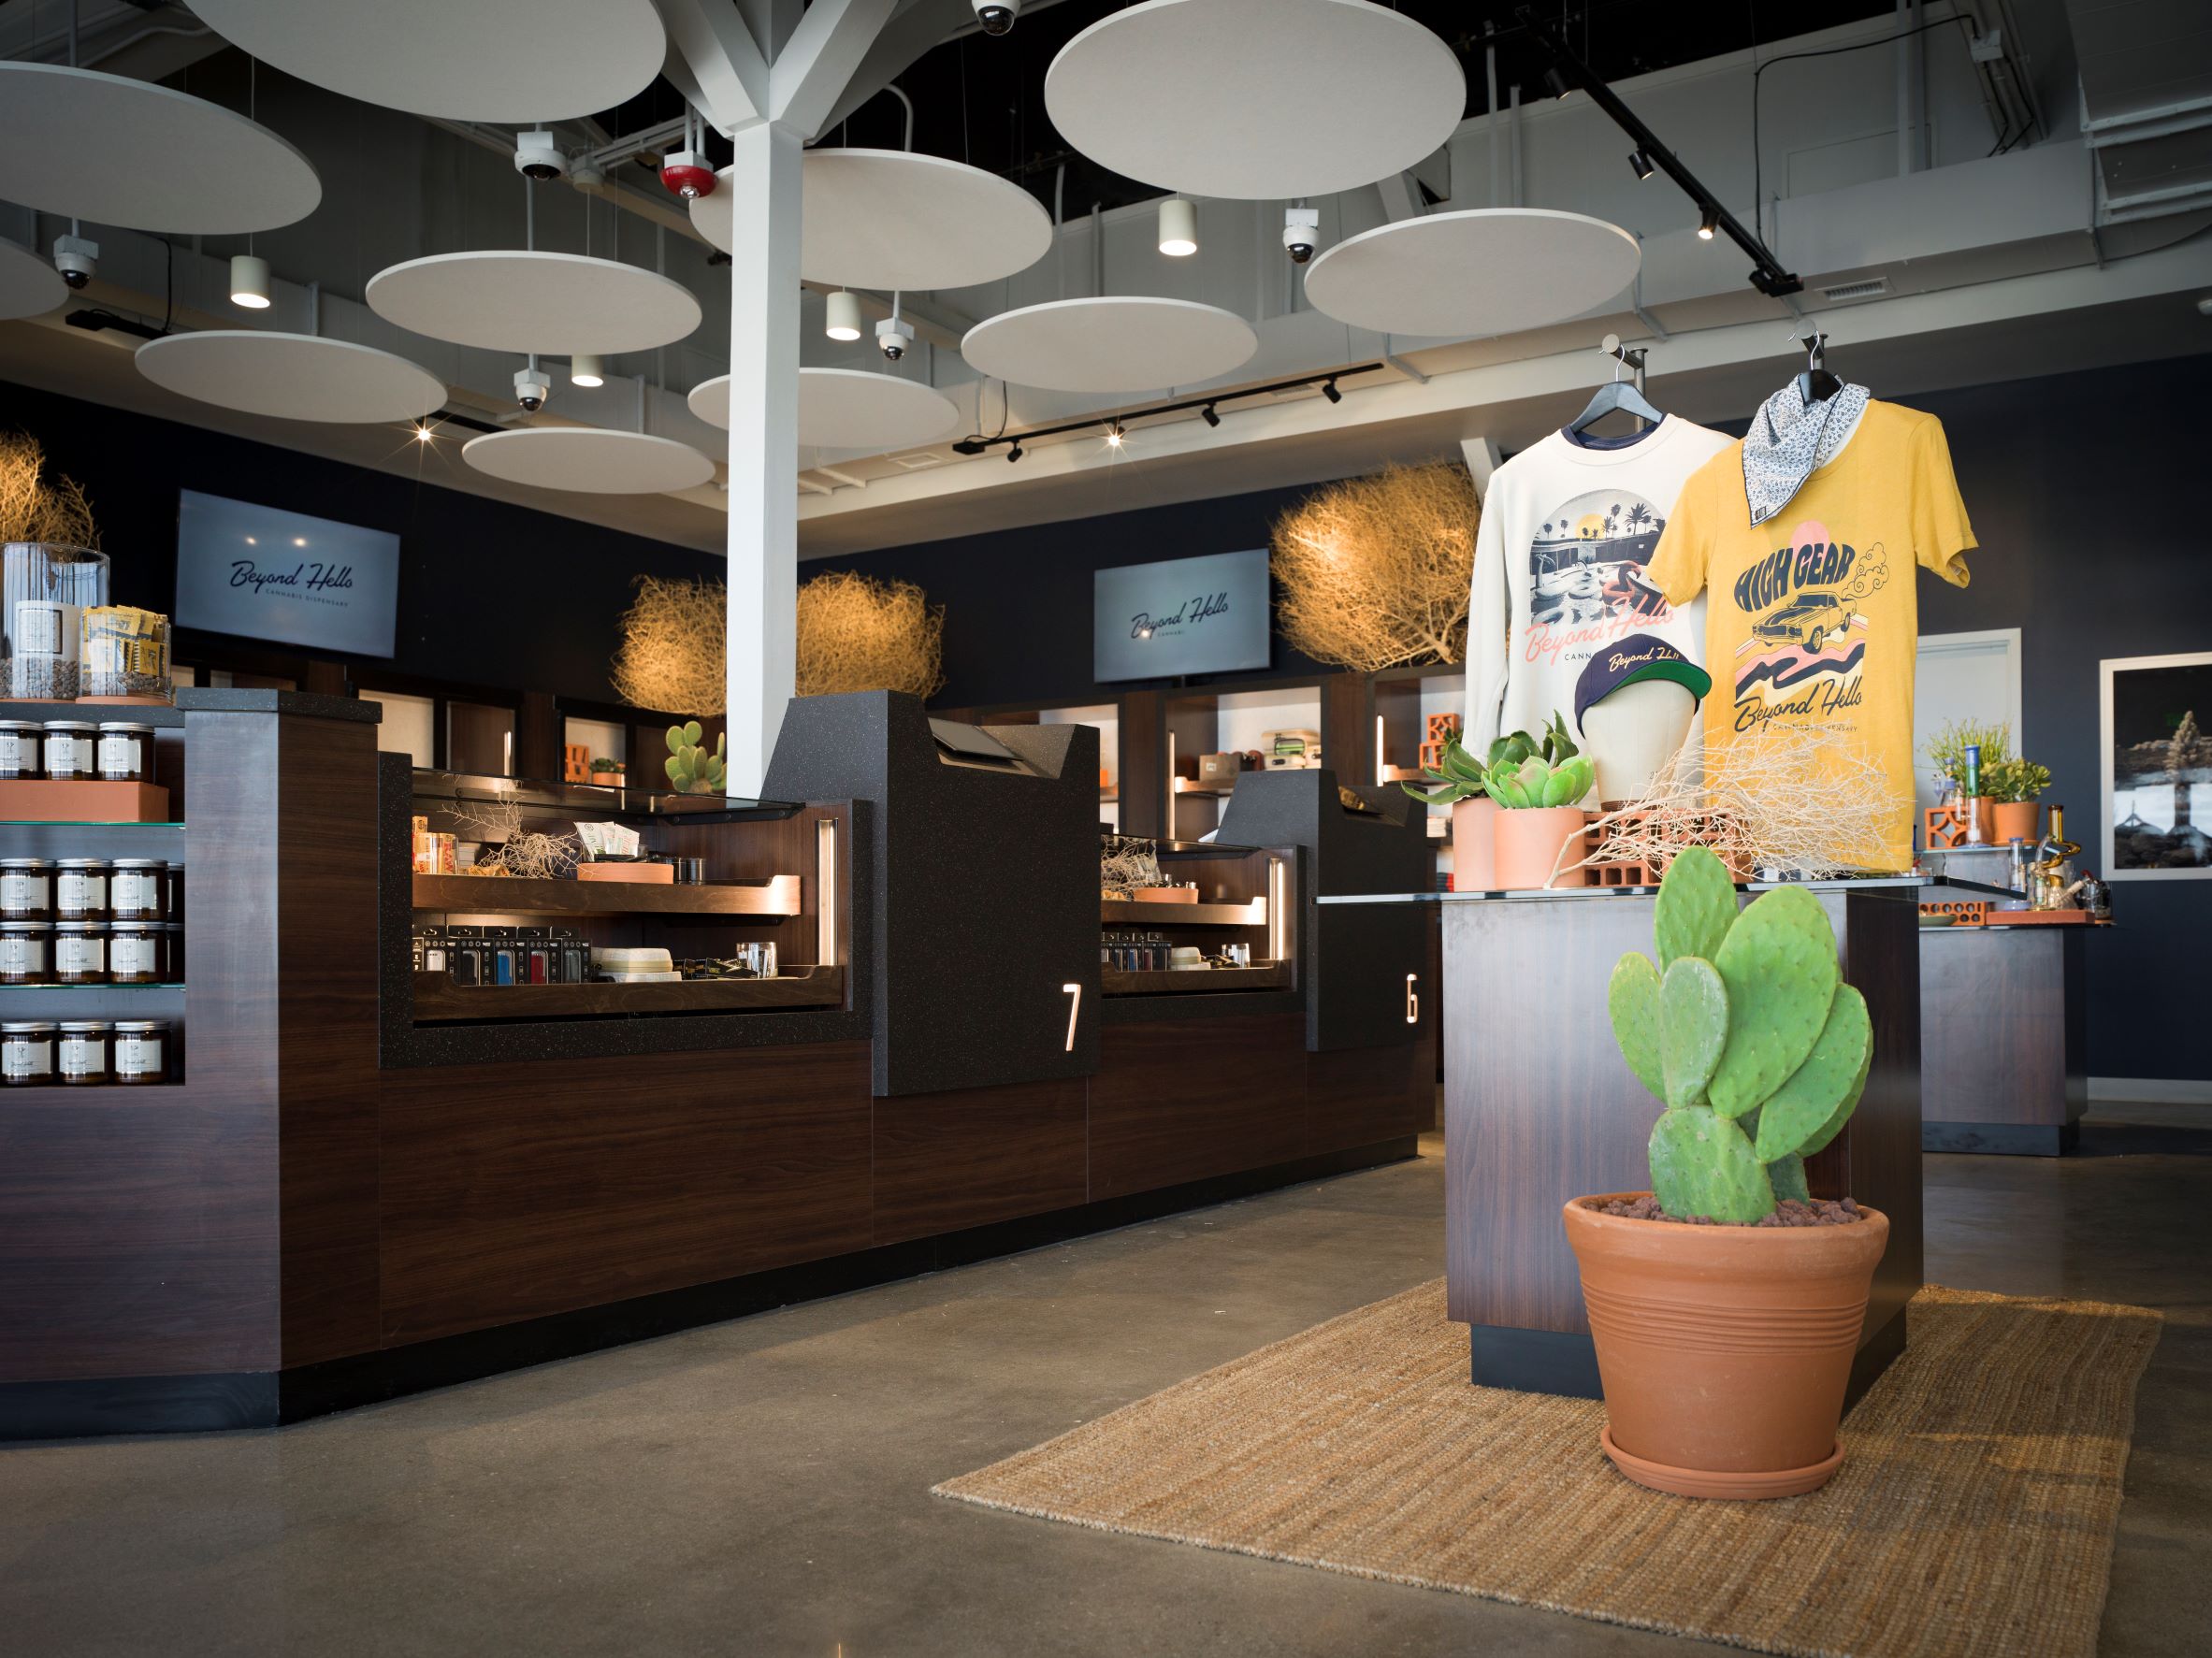 The redesigned Palm Springs store capitalizes on the power of sensory branding by delivering an immersive experience to customers that takes them on a desert journey. It is also the first store to feature the Beyond Hello™ new branding and logo, which signals an evolution for not only the Company but the cannabis industry at large.